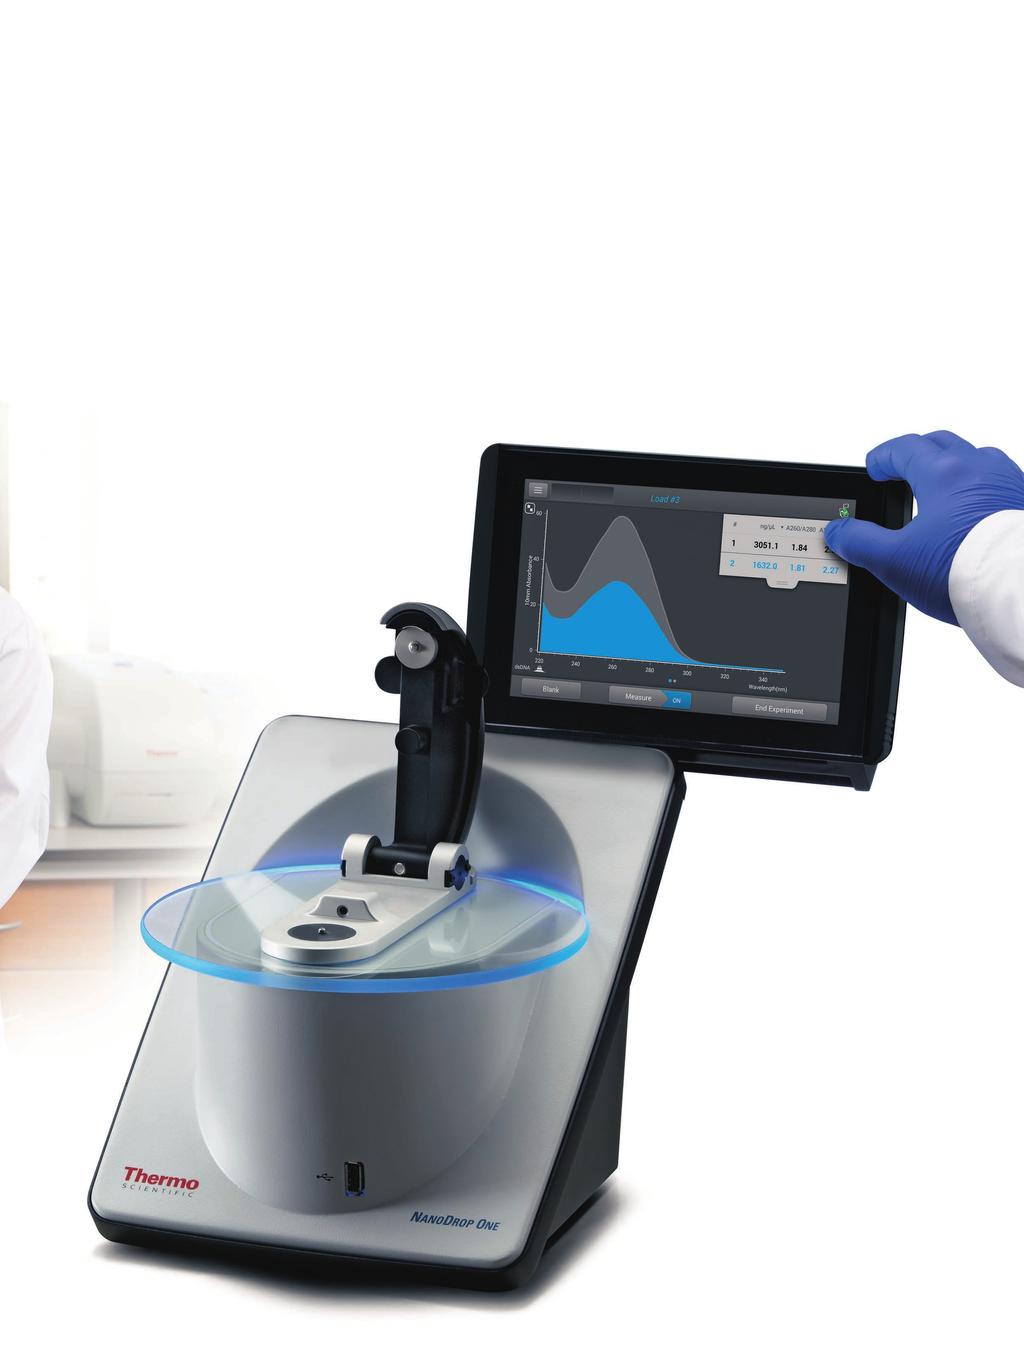 Accelerate discovery with NanoDrop One technology Walk-Up Convenience A standalone unit with a high resolution touchscreen interface and local control features guided method analysis to save you time